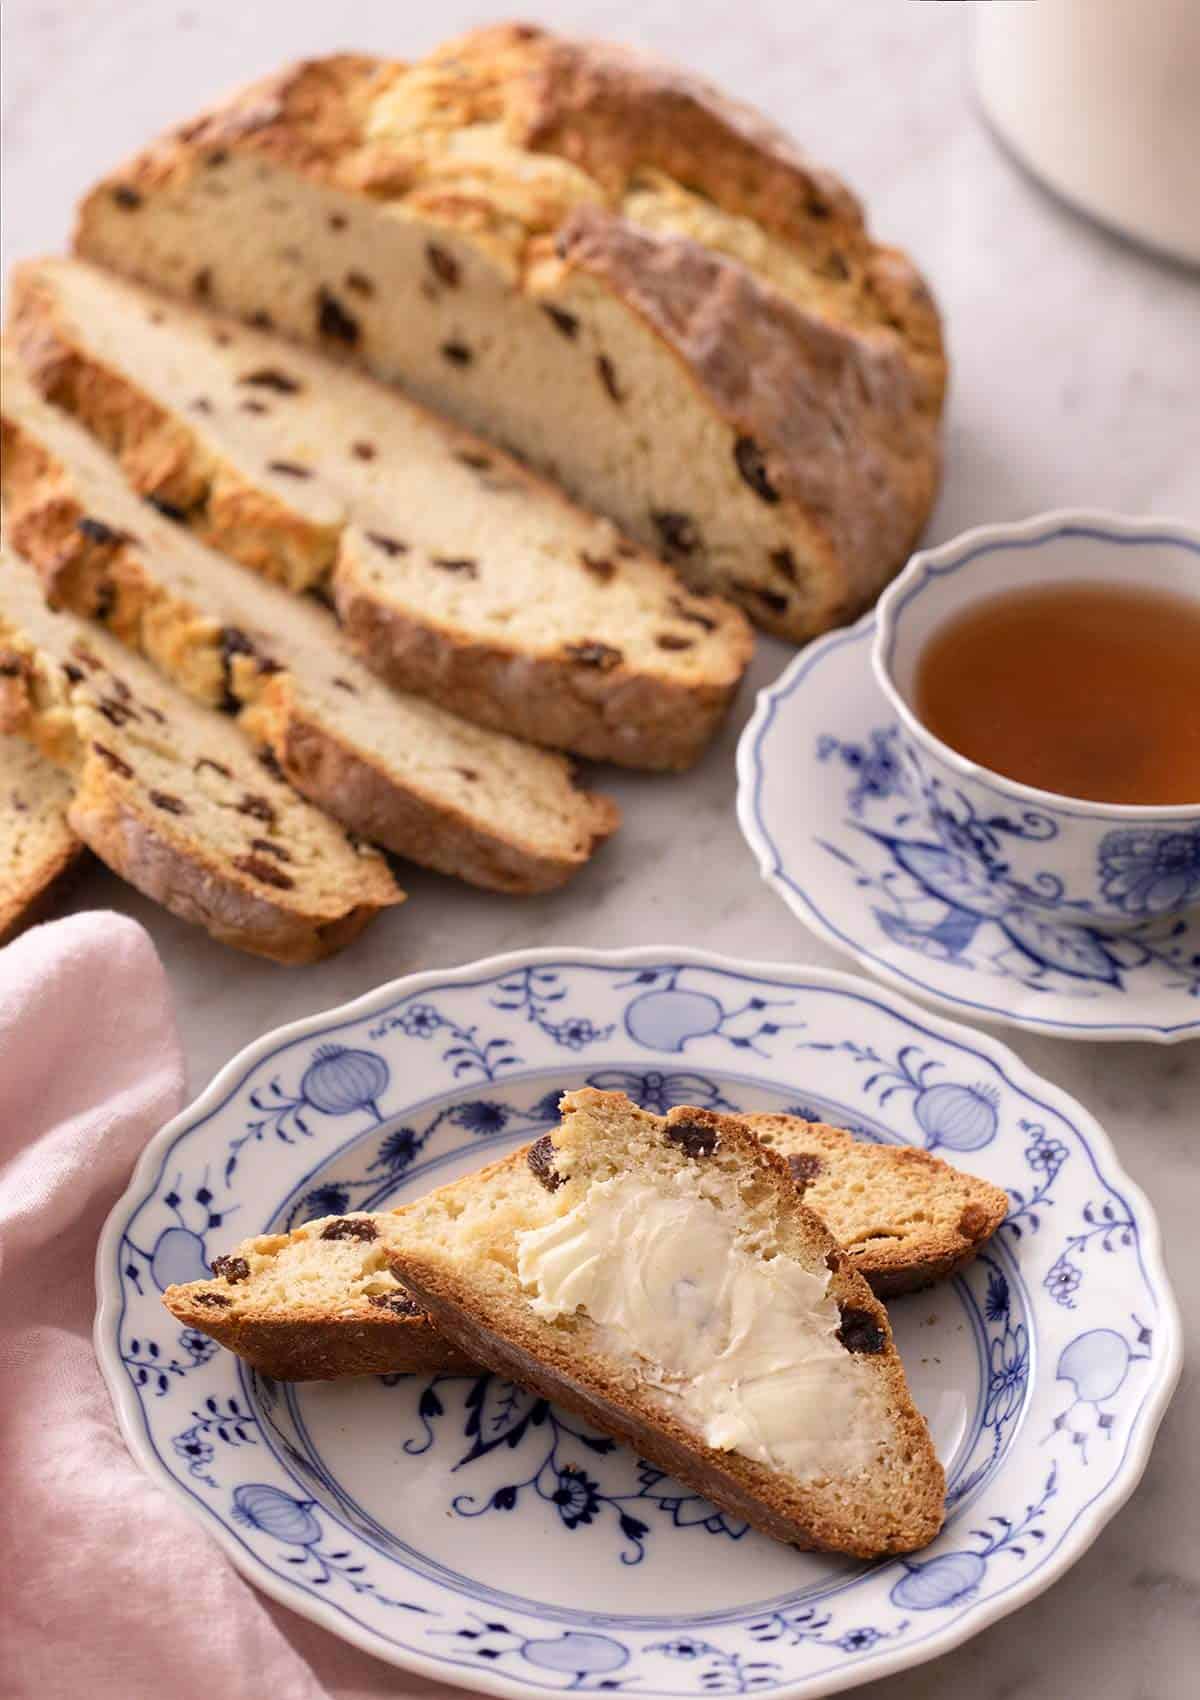 Slices of Irish soda bread spread with butter on a blue plate.